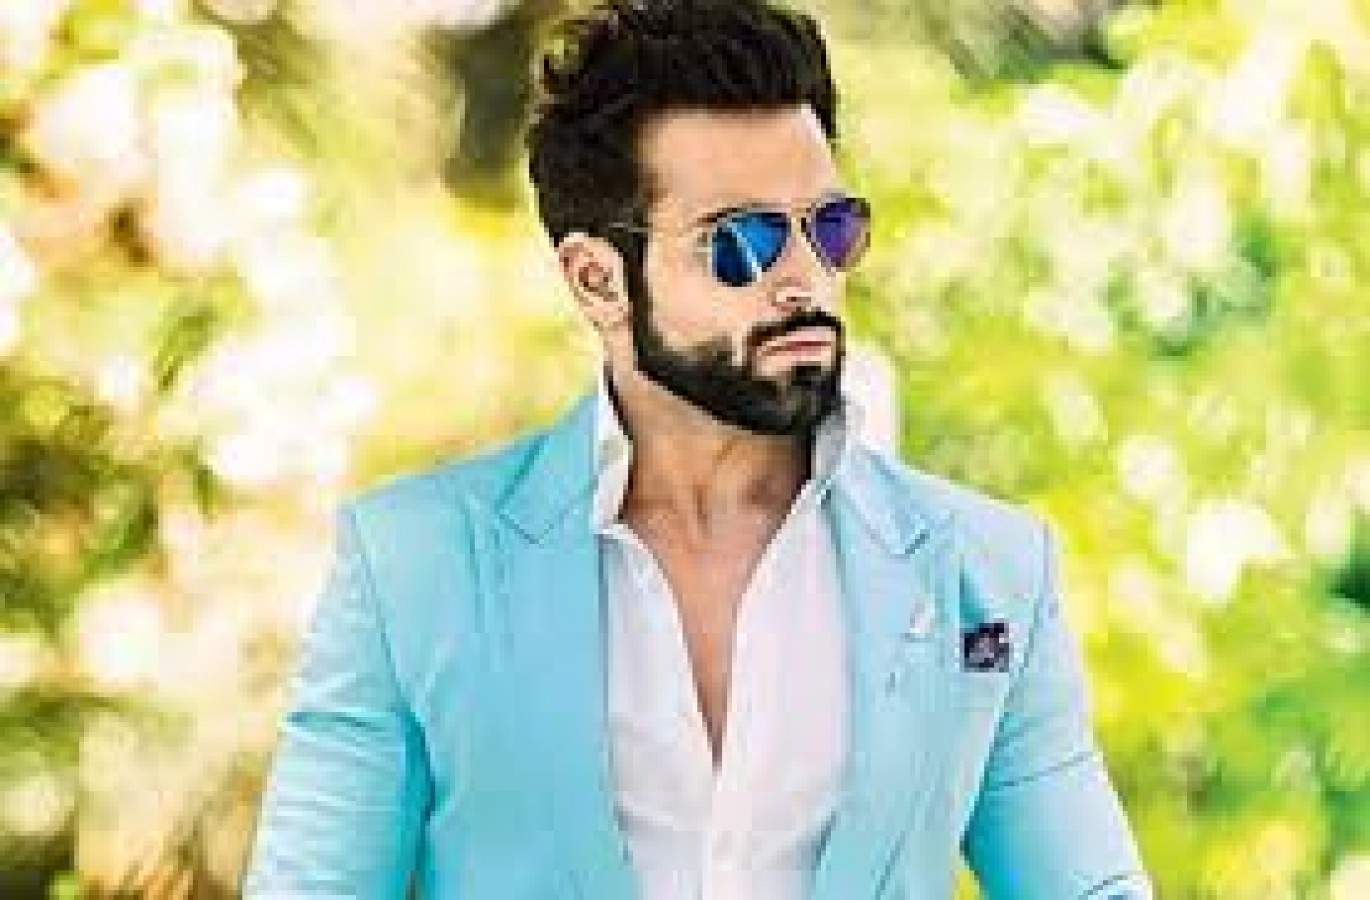 Rithvik Dhanjani: My fans have the right to gossip and write about my life  - Hindustan Times